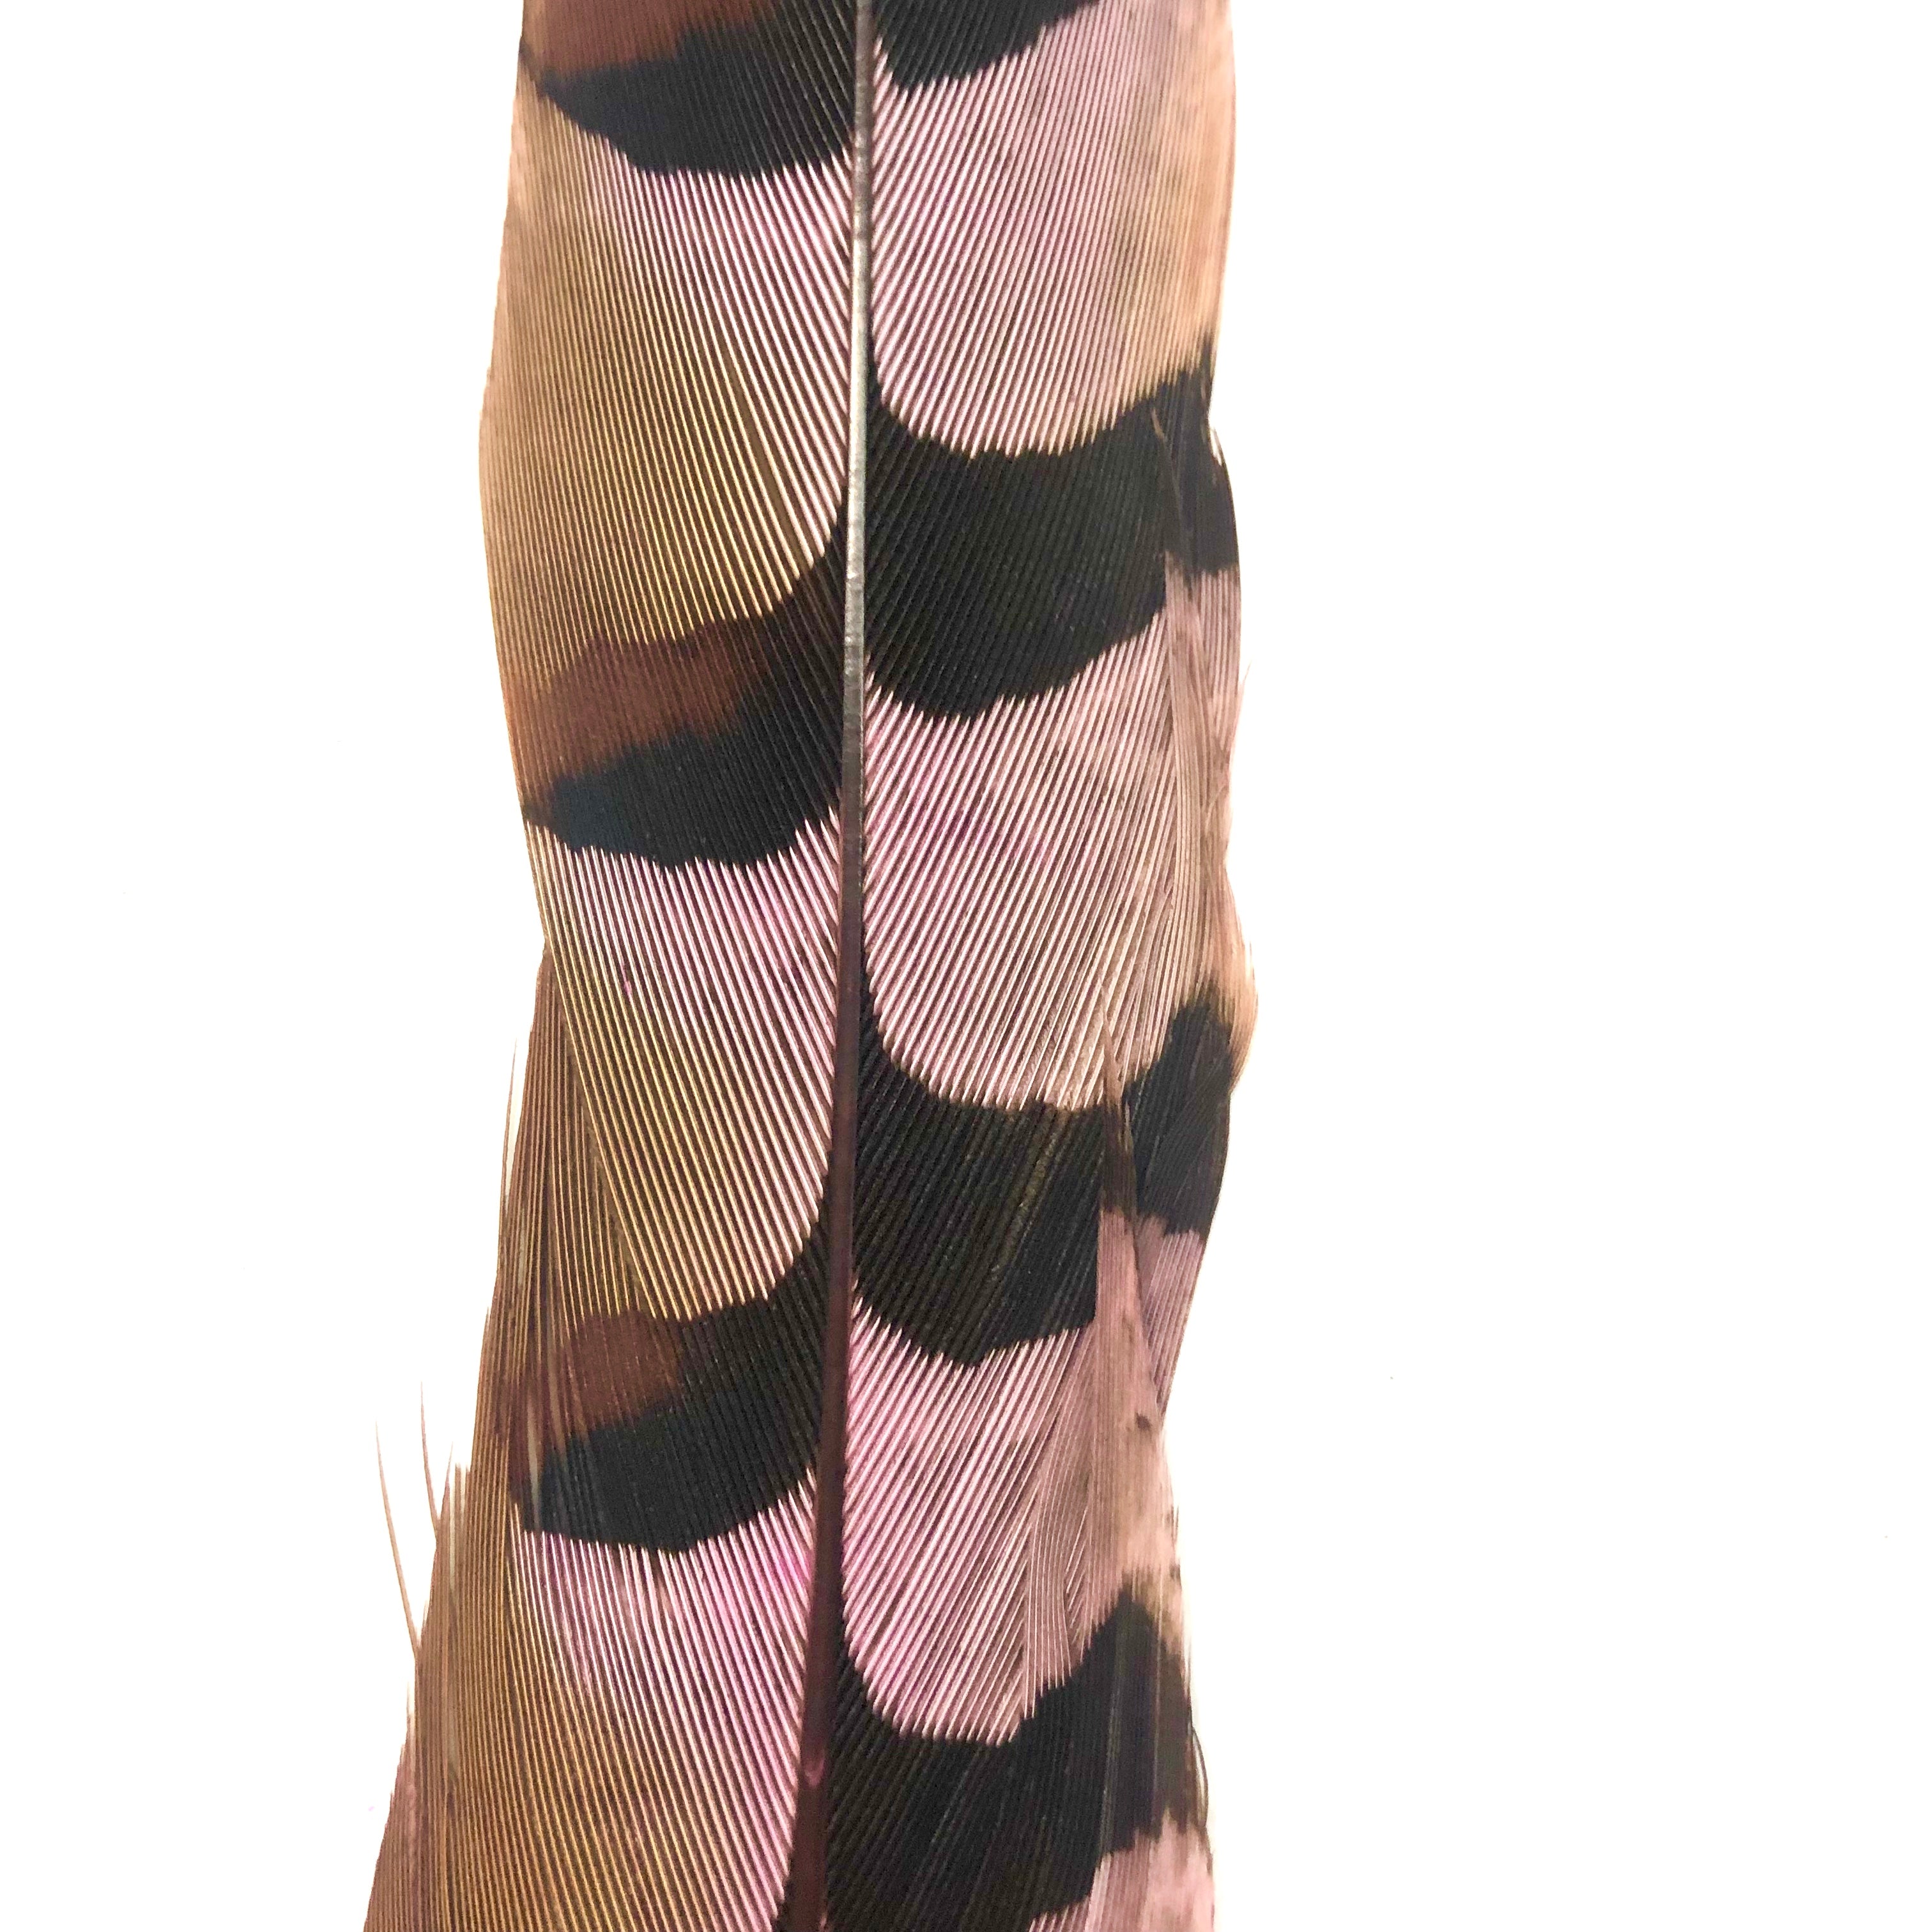 18" to 20" Reeves Pheasant Tail Feather - Pink ((SECONDS))